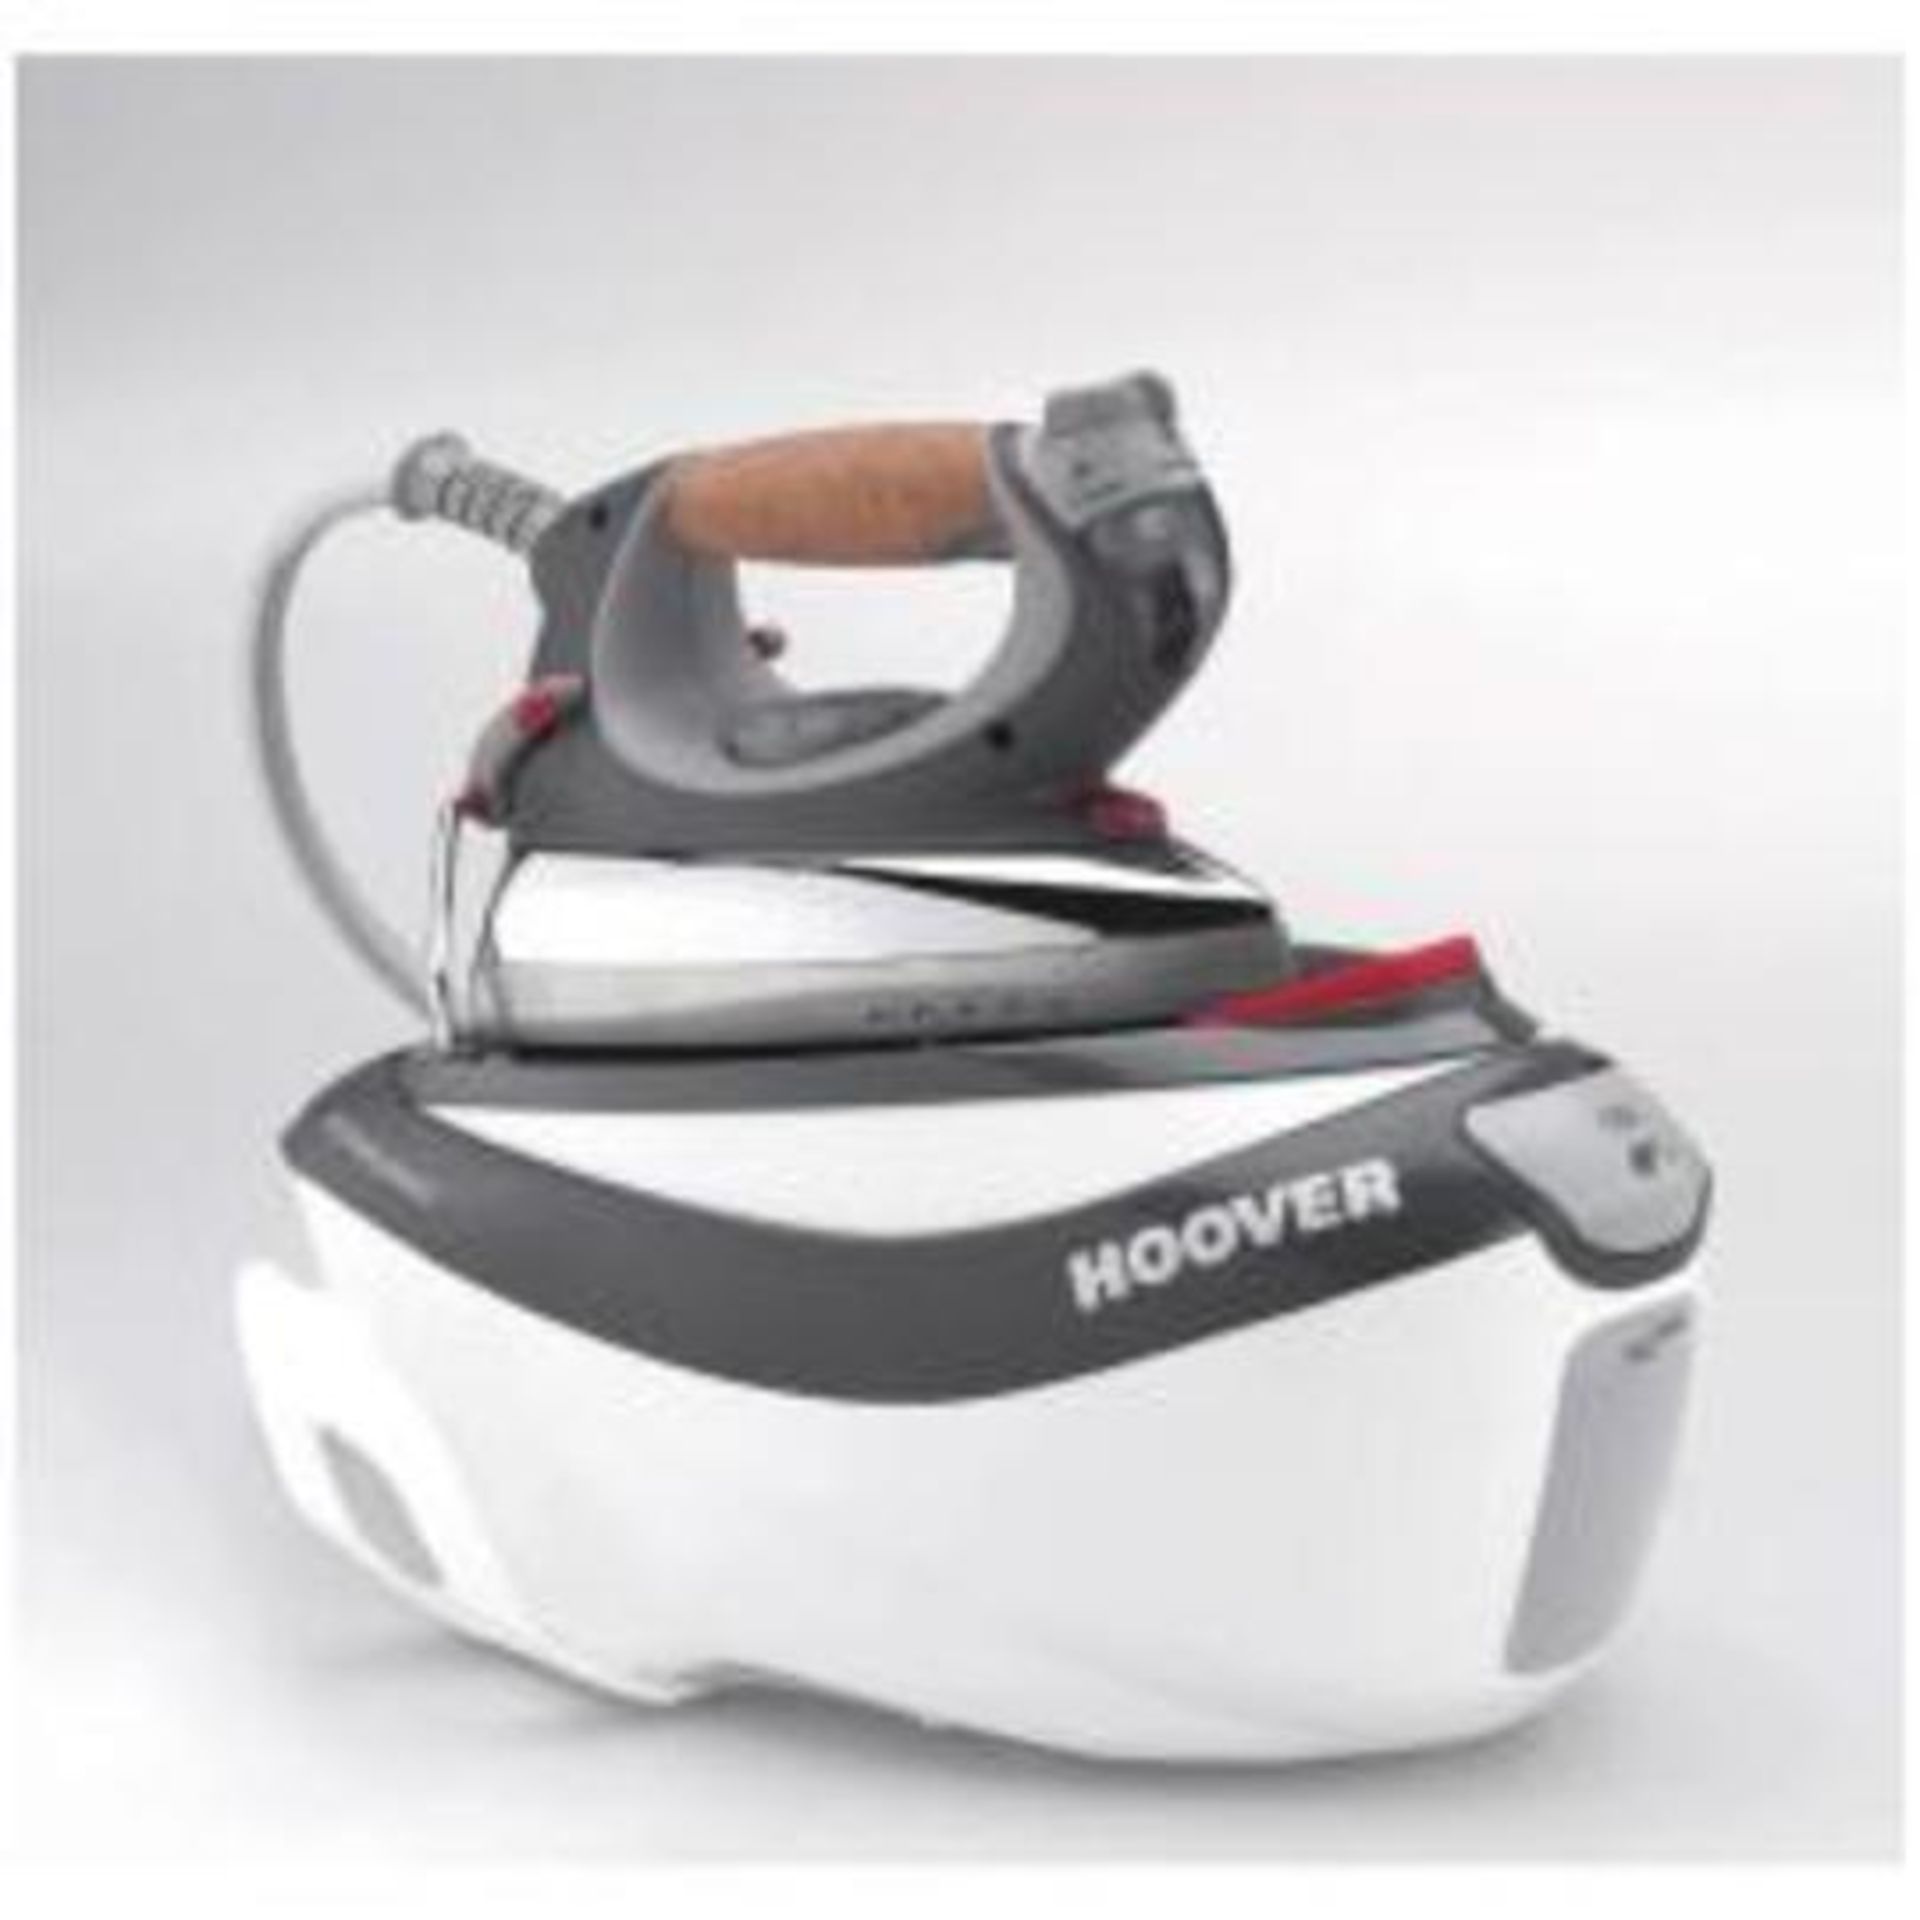 V  Grade A Hoover Iron Speed 2100w 4.5 Bar Pressure Ironing System (Continental Plug)